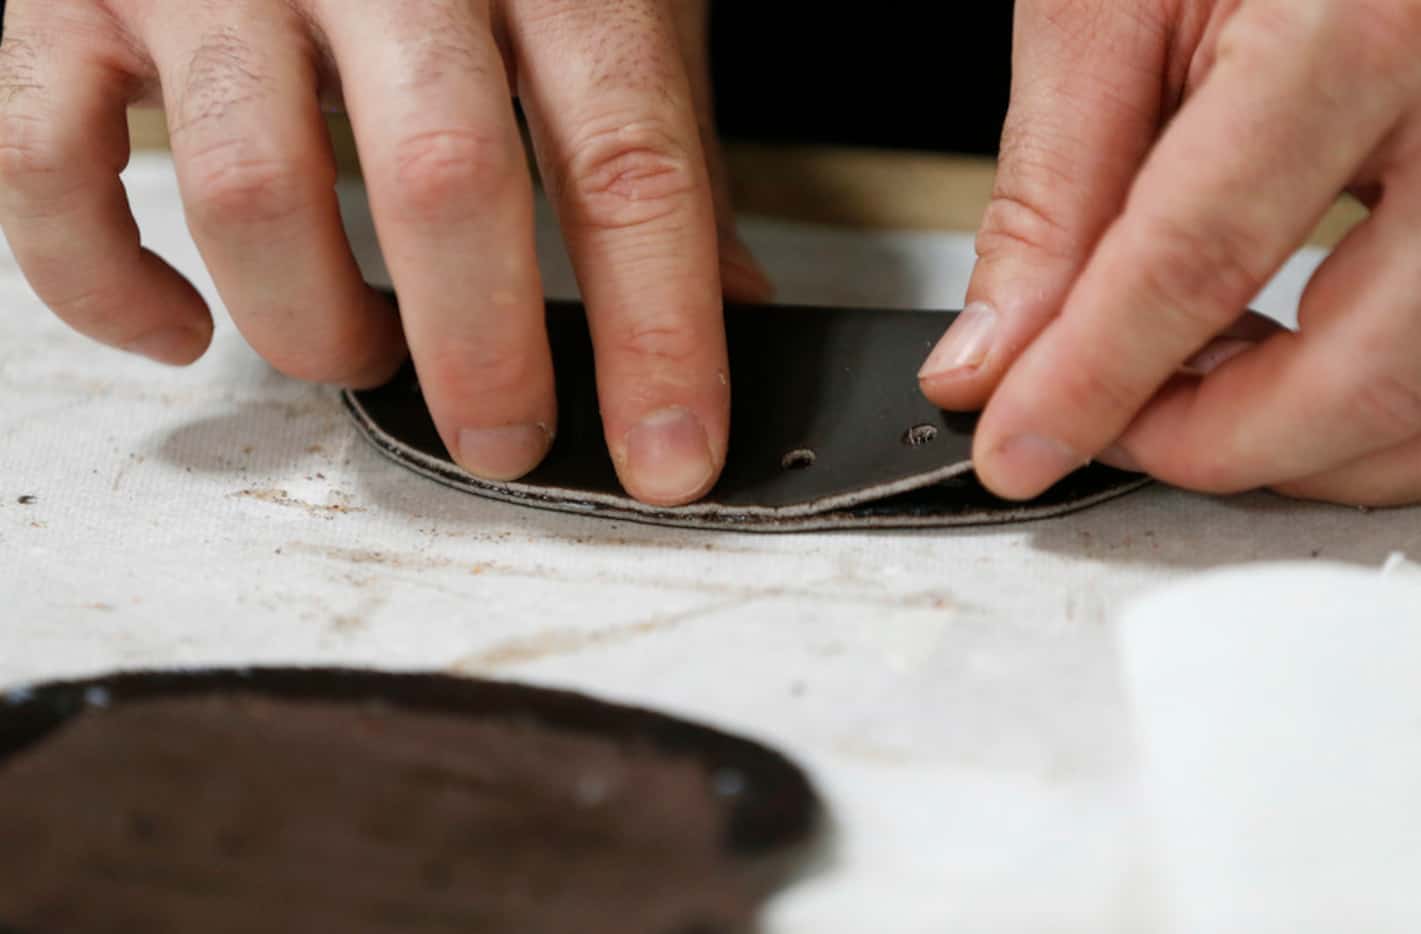 Kevin Ralls works on gluing pieces together before making the web area of a baseball glove...